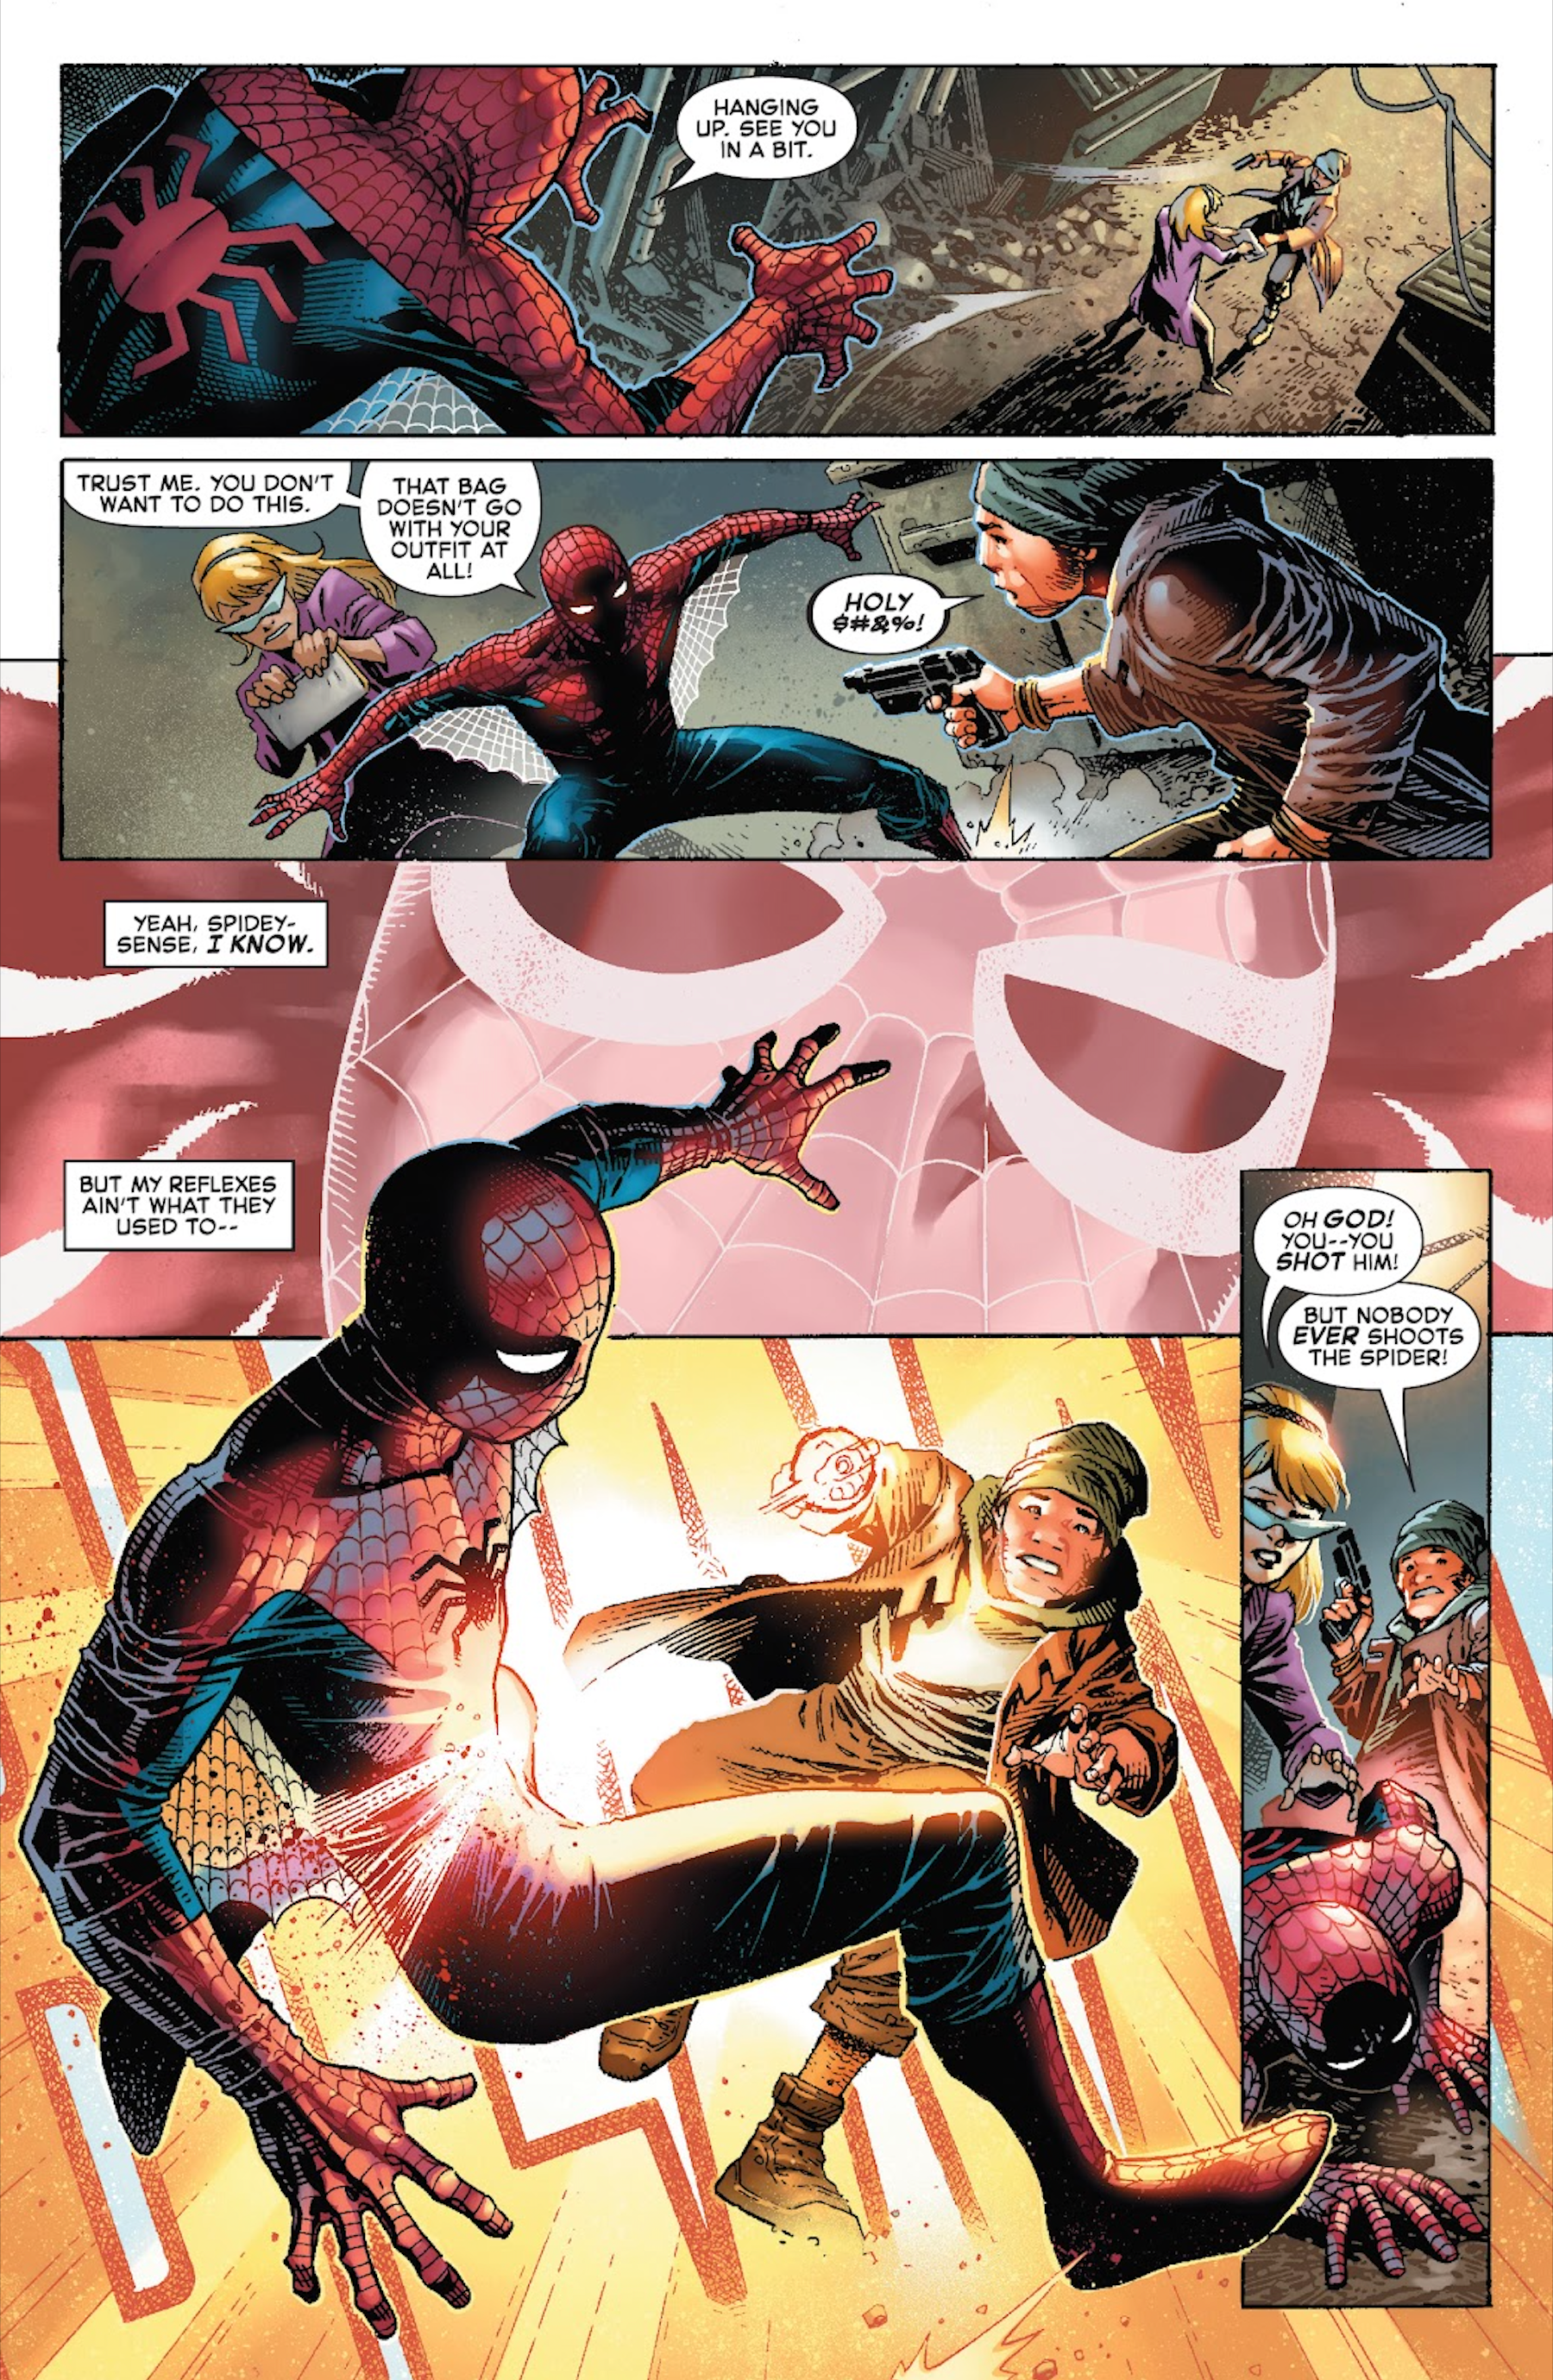 Spider-Man is fatally shot and almost dies